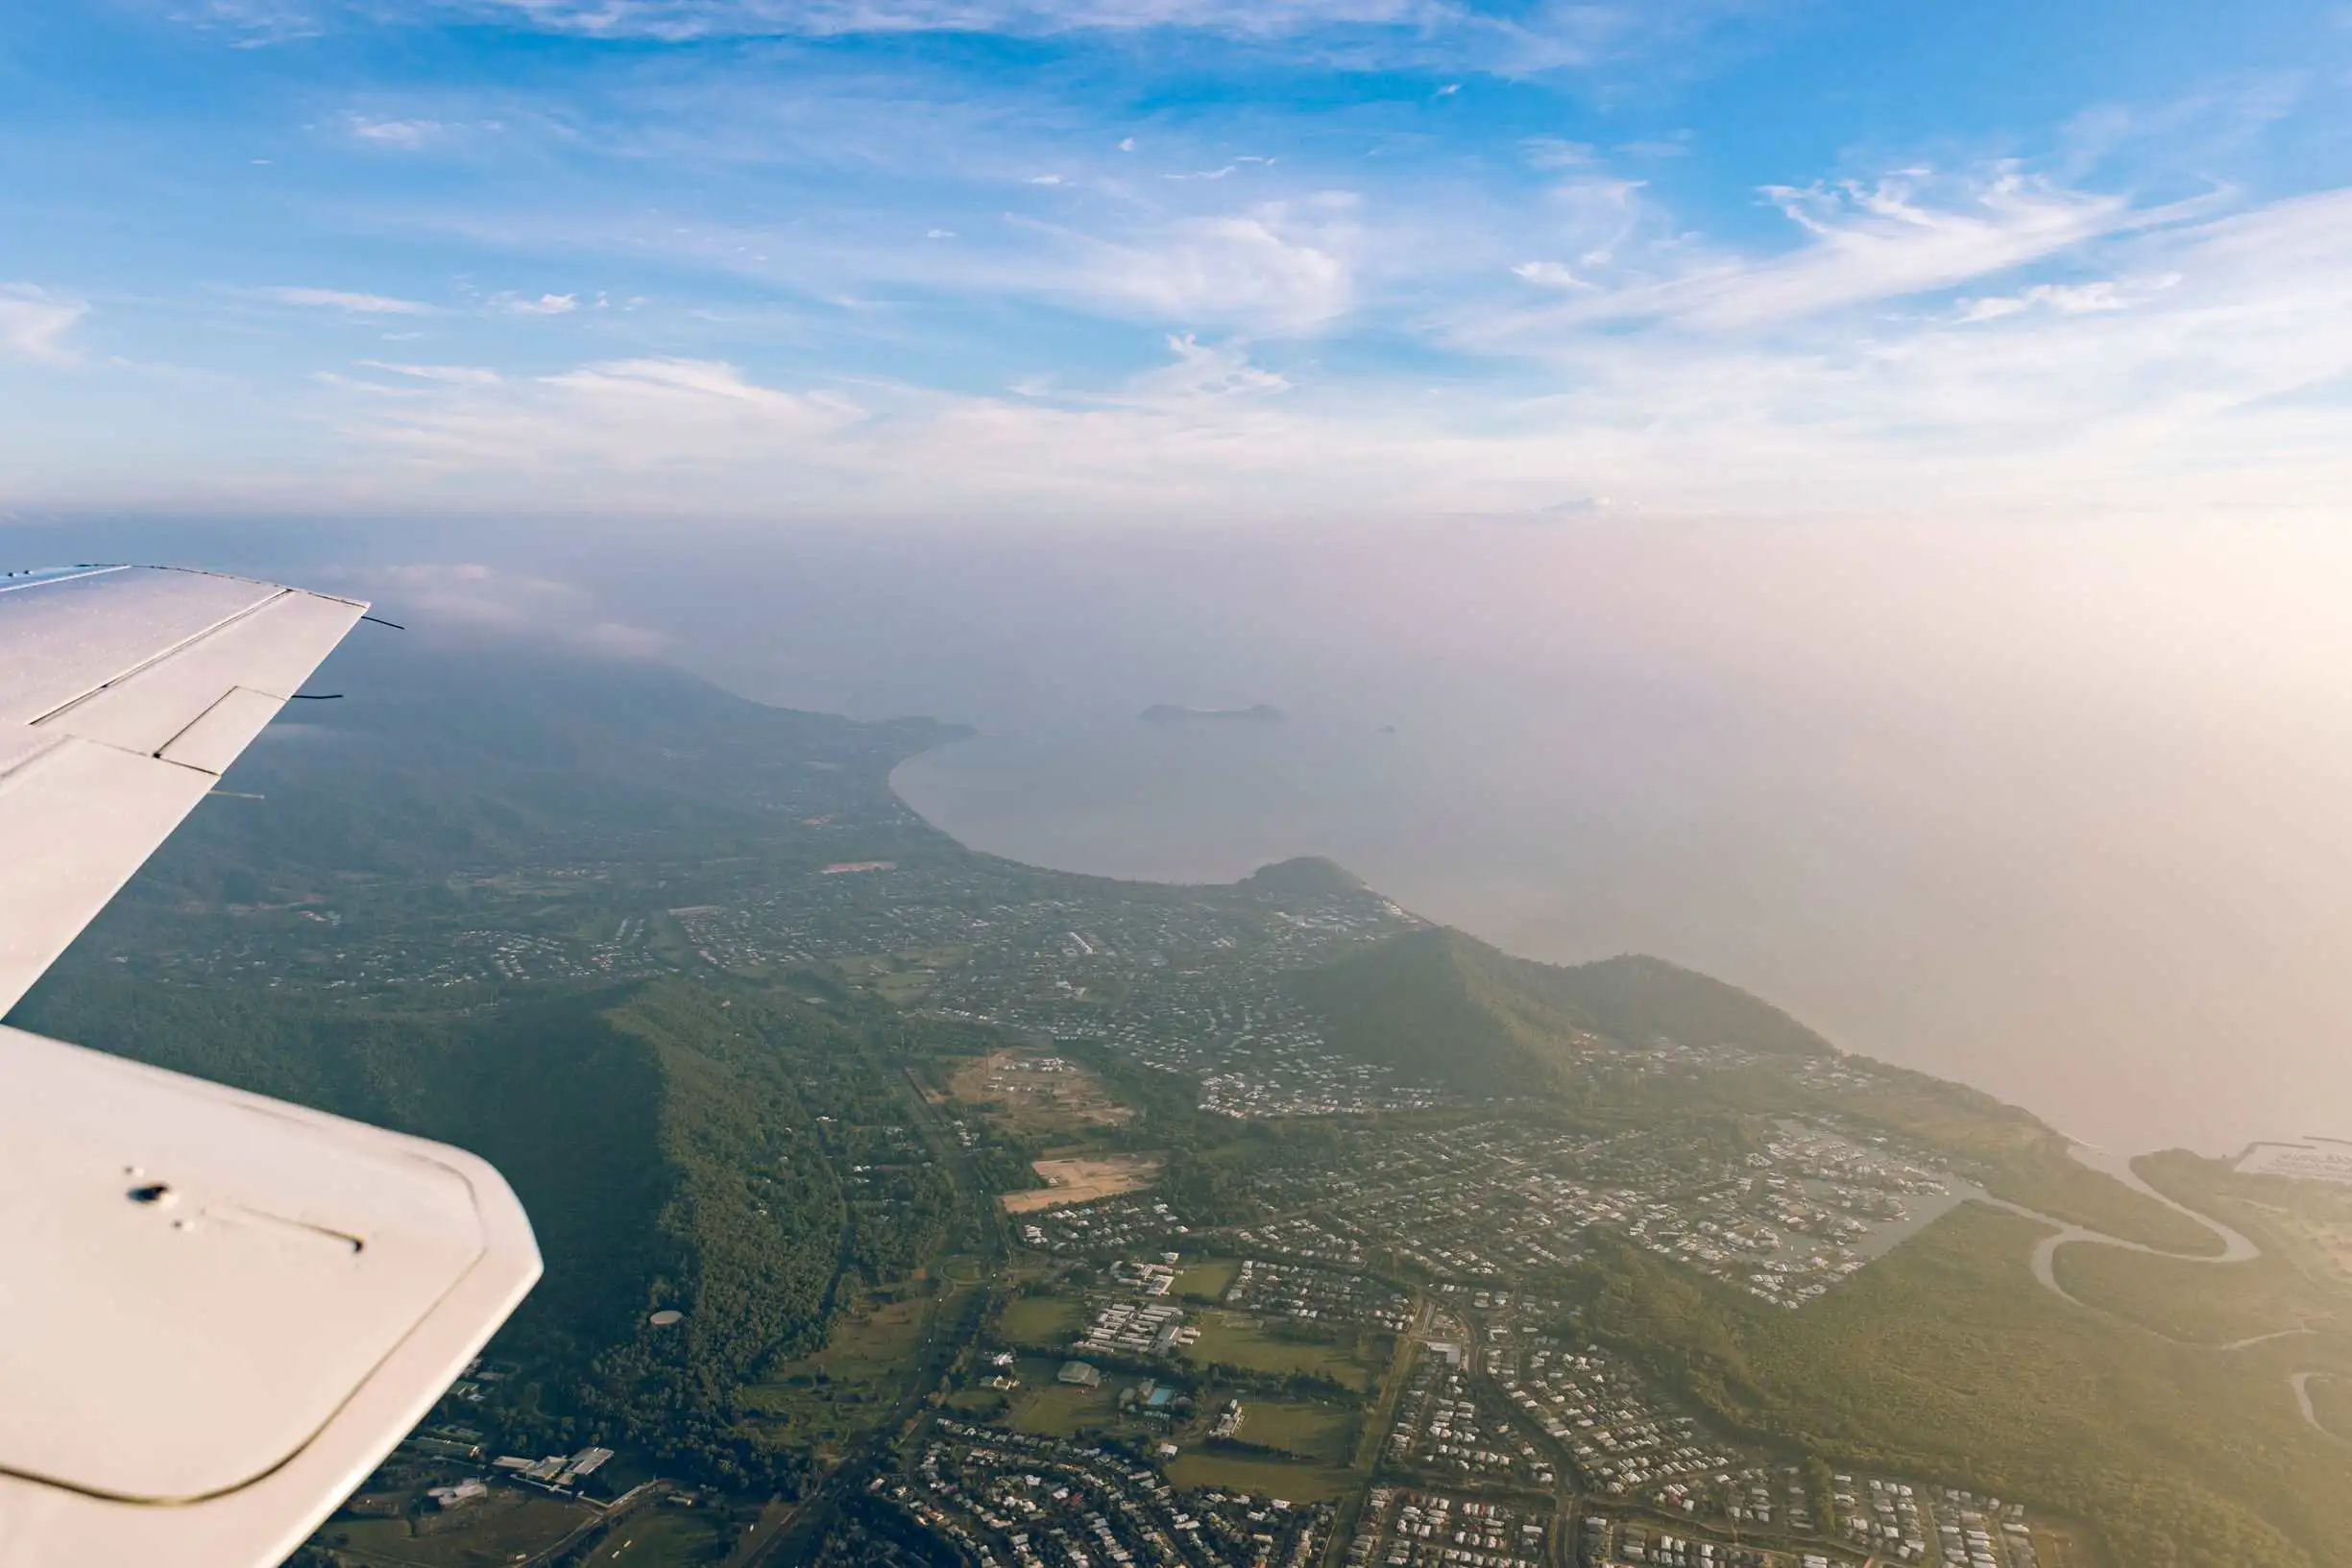 The view from a plane when arriving in cainrs. The wing top and below the city surrounded in deep greenery meeting the ocean.